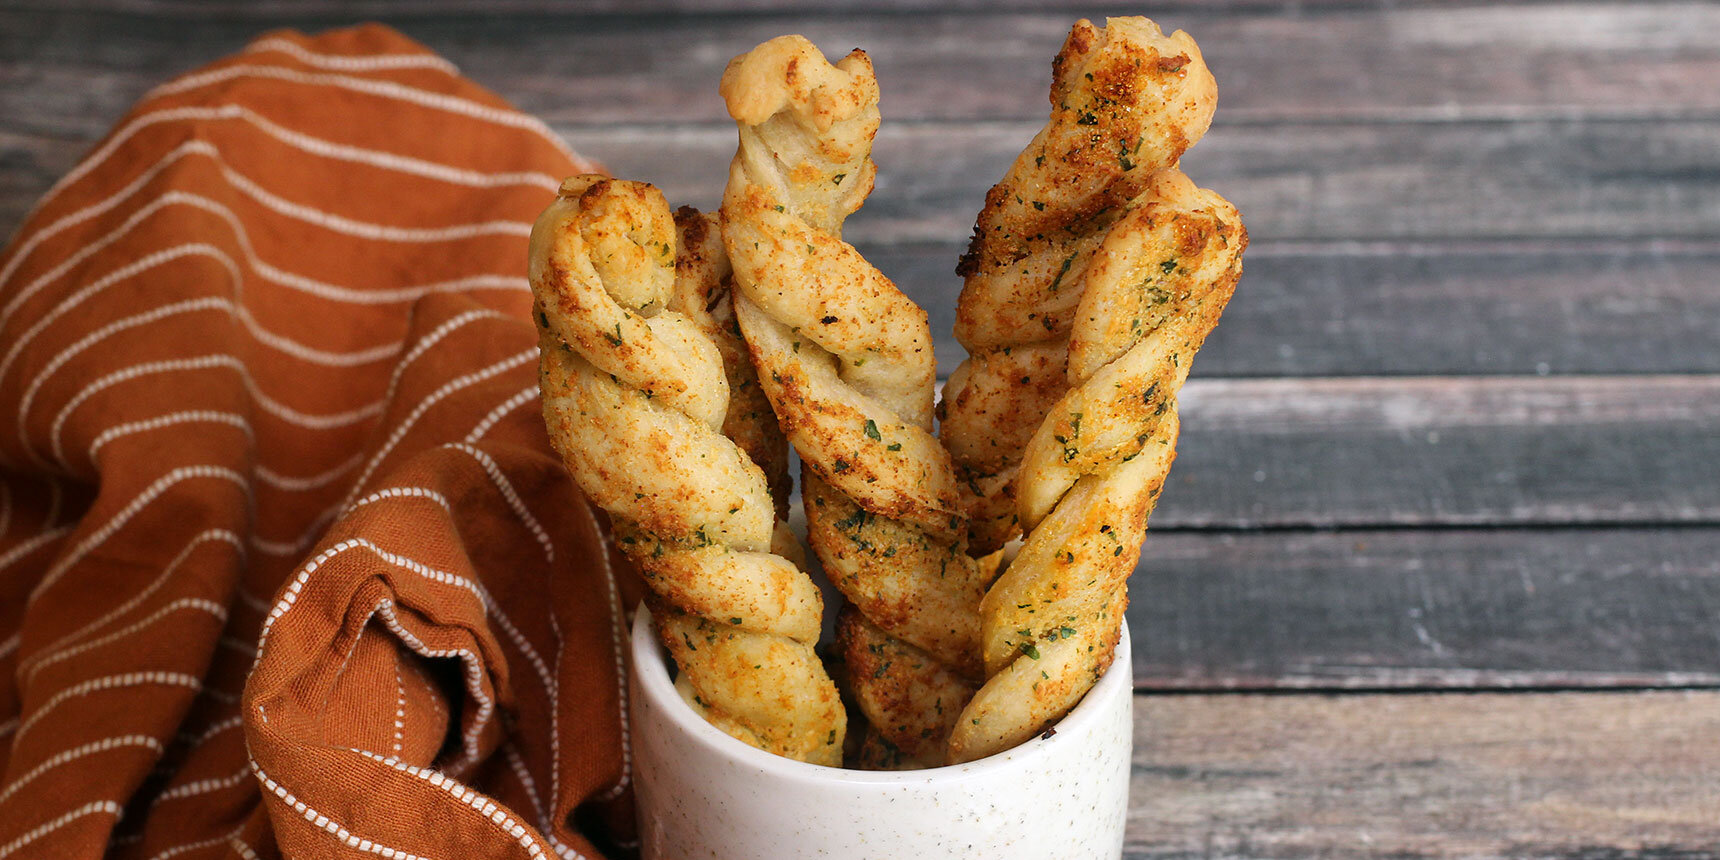 Butter Sticks: Grease Sticks for Toast